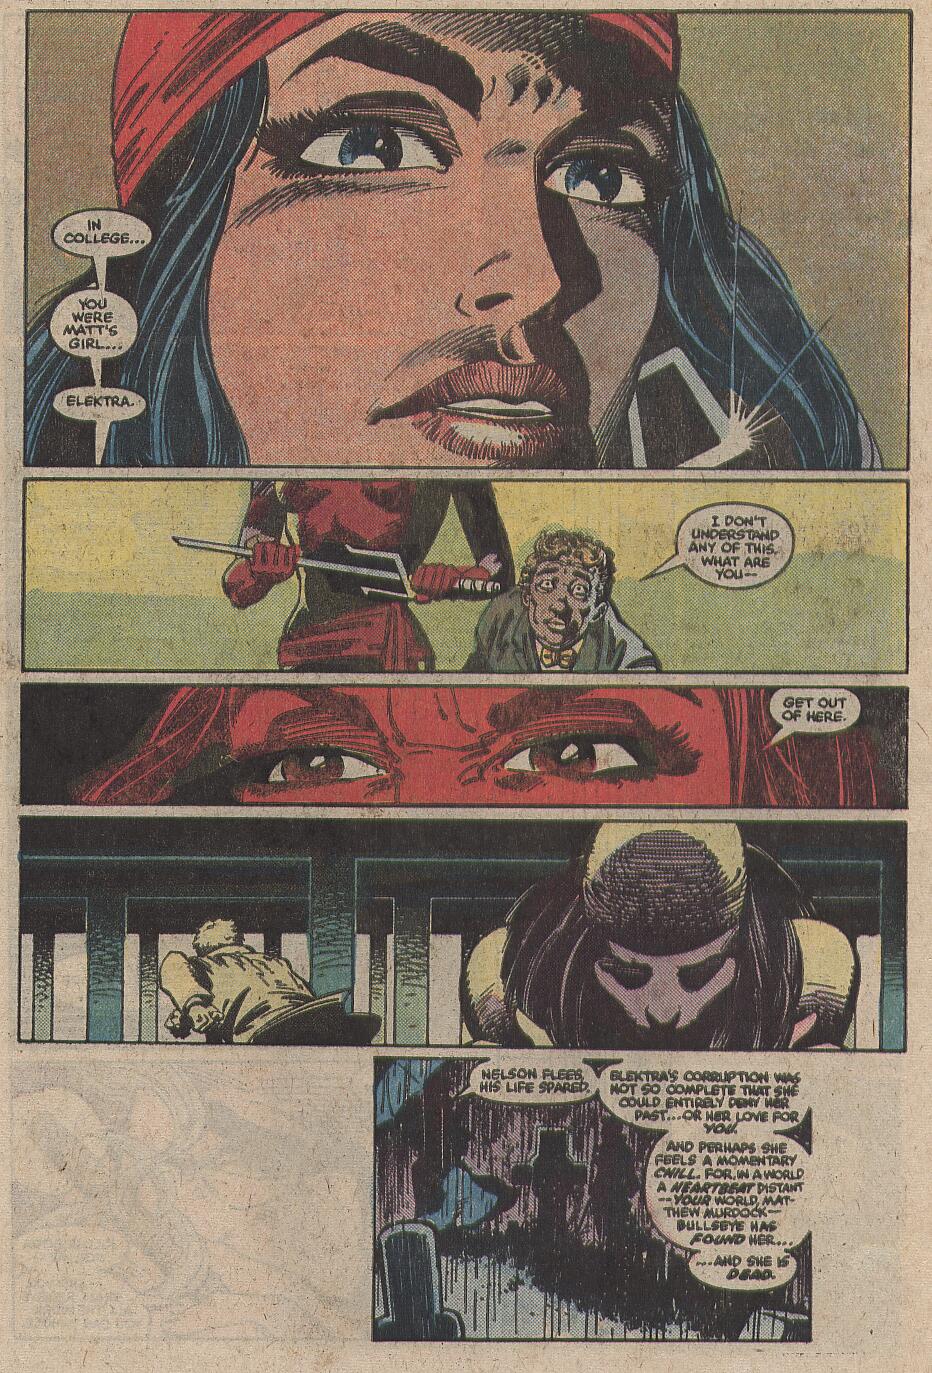 What If? (1977) issue 35 - Elektra had lived - Page 5